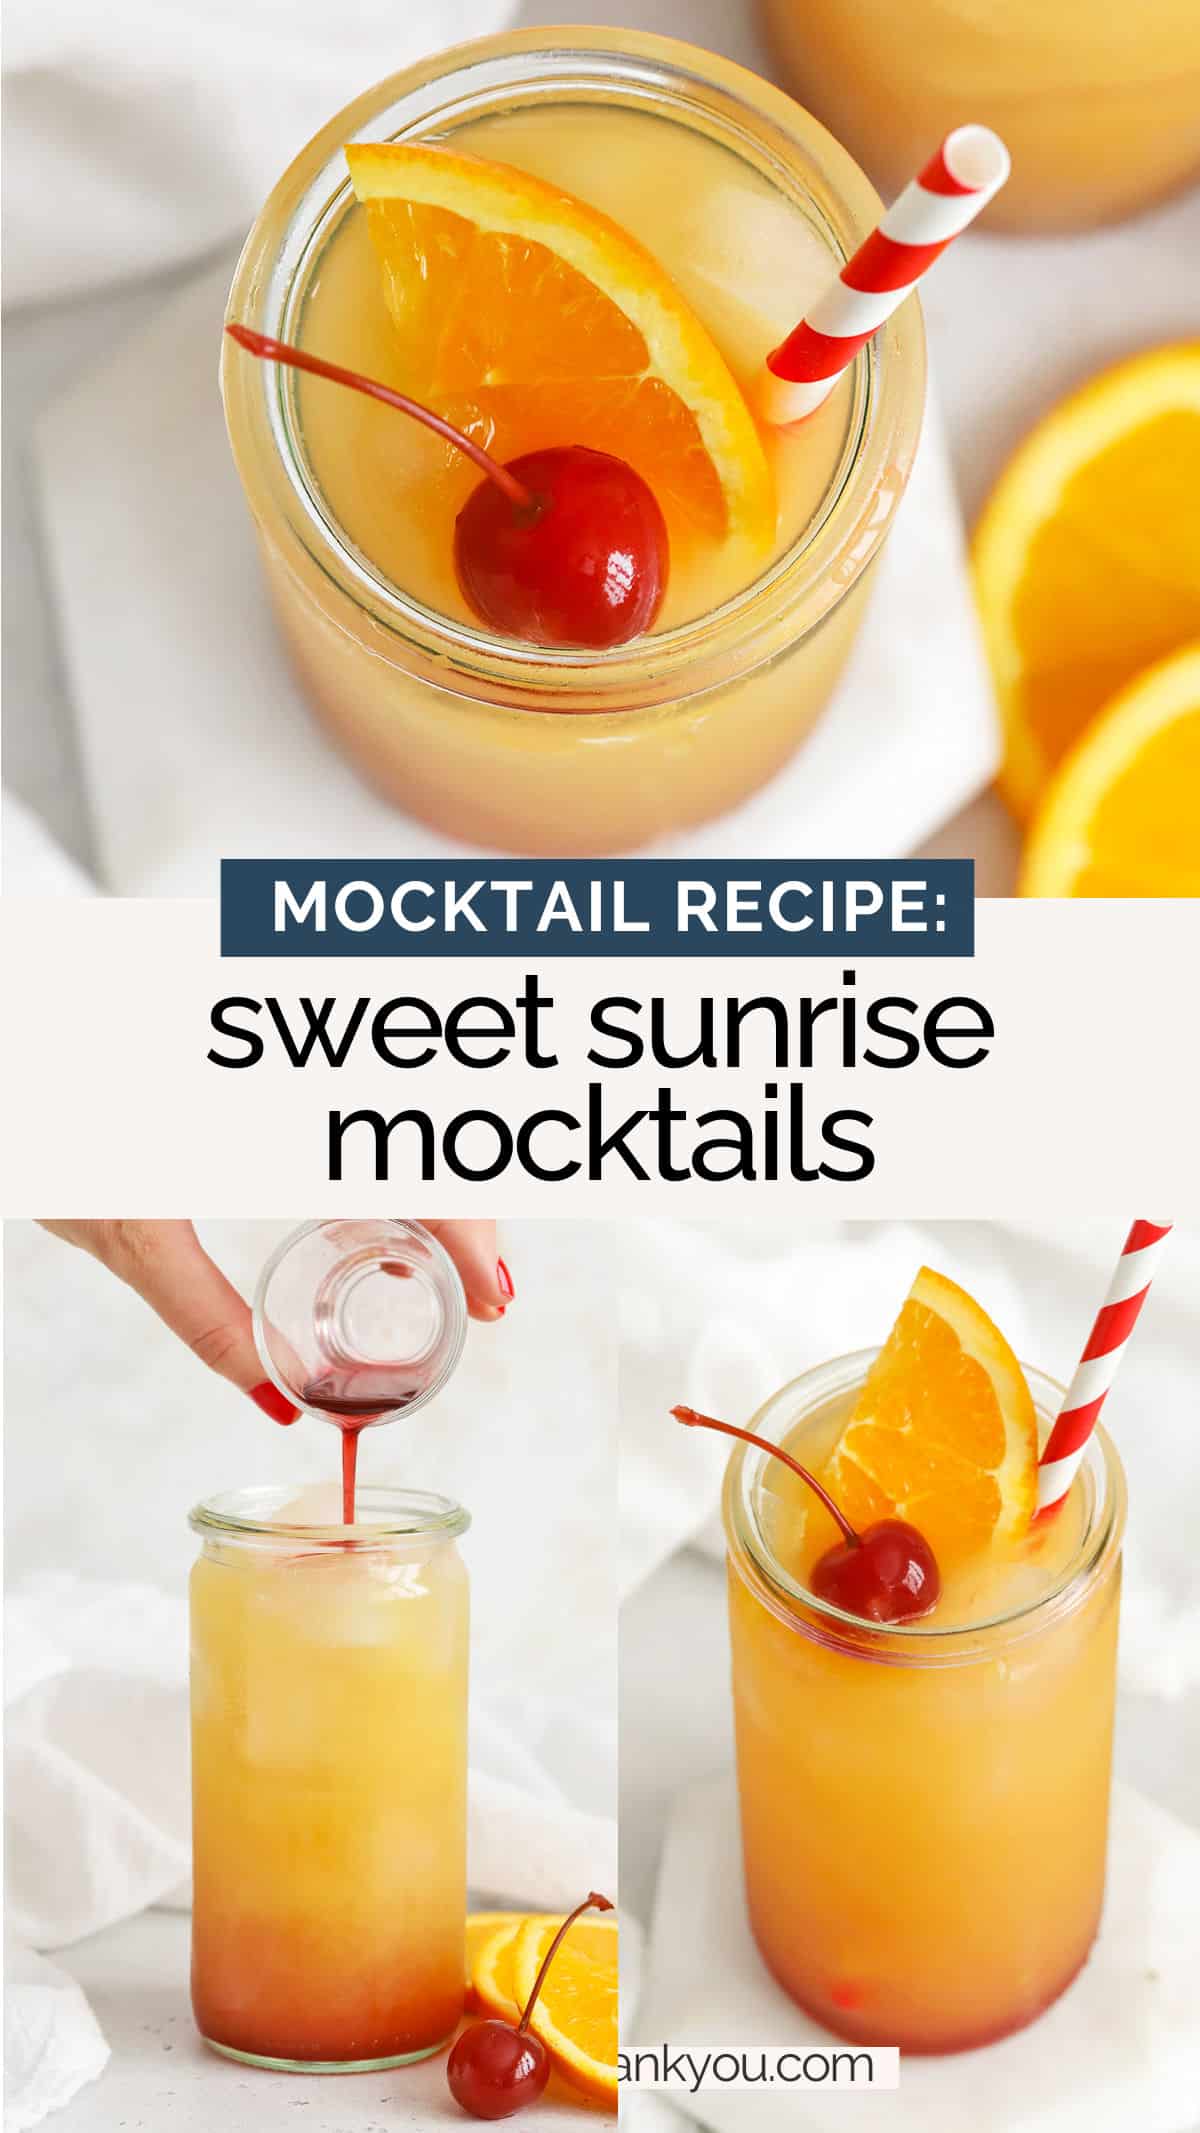 Sweet Sunrise Mocktail - This colorful virgin sunrise drink is as gorgeous as it is refreshing! It's the perfect sweet drink to sip for a special occasion. Non-alcoholic sunrise cocktail // sunrise mocktail recipe // orange juice grenadine mocktails // non alcoholic sunrise // grenadine mocktail recipe // mocktails with grenadine // virgin tequila sunrise // virgin sunrise drink // sunrise mocktail drink // orange juice mocktail // Sweets And Thank You Sunrise Mocktails